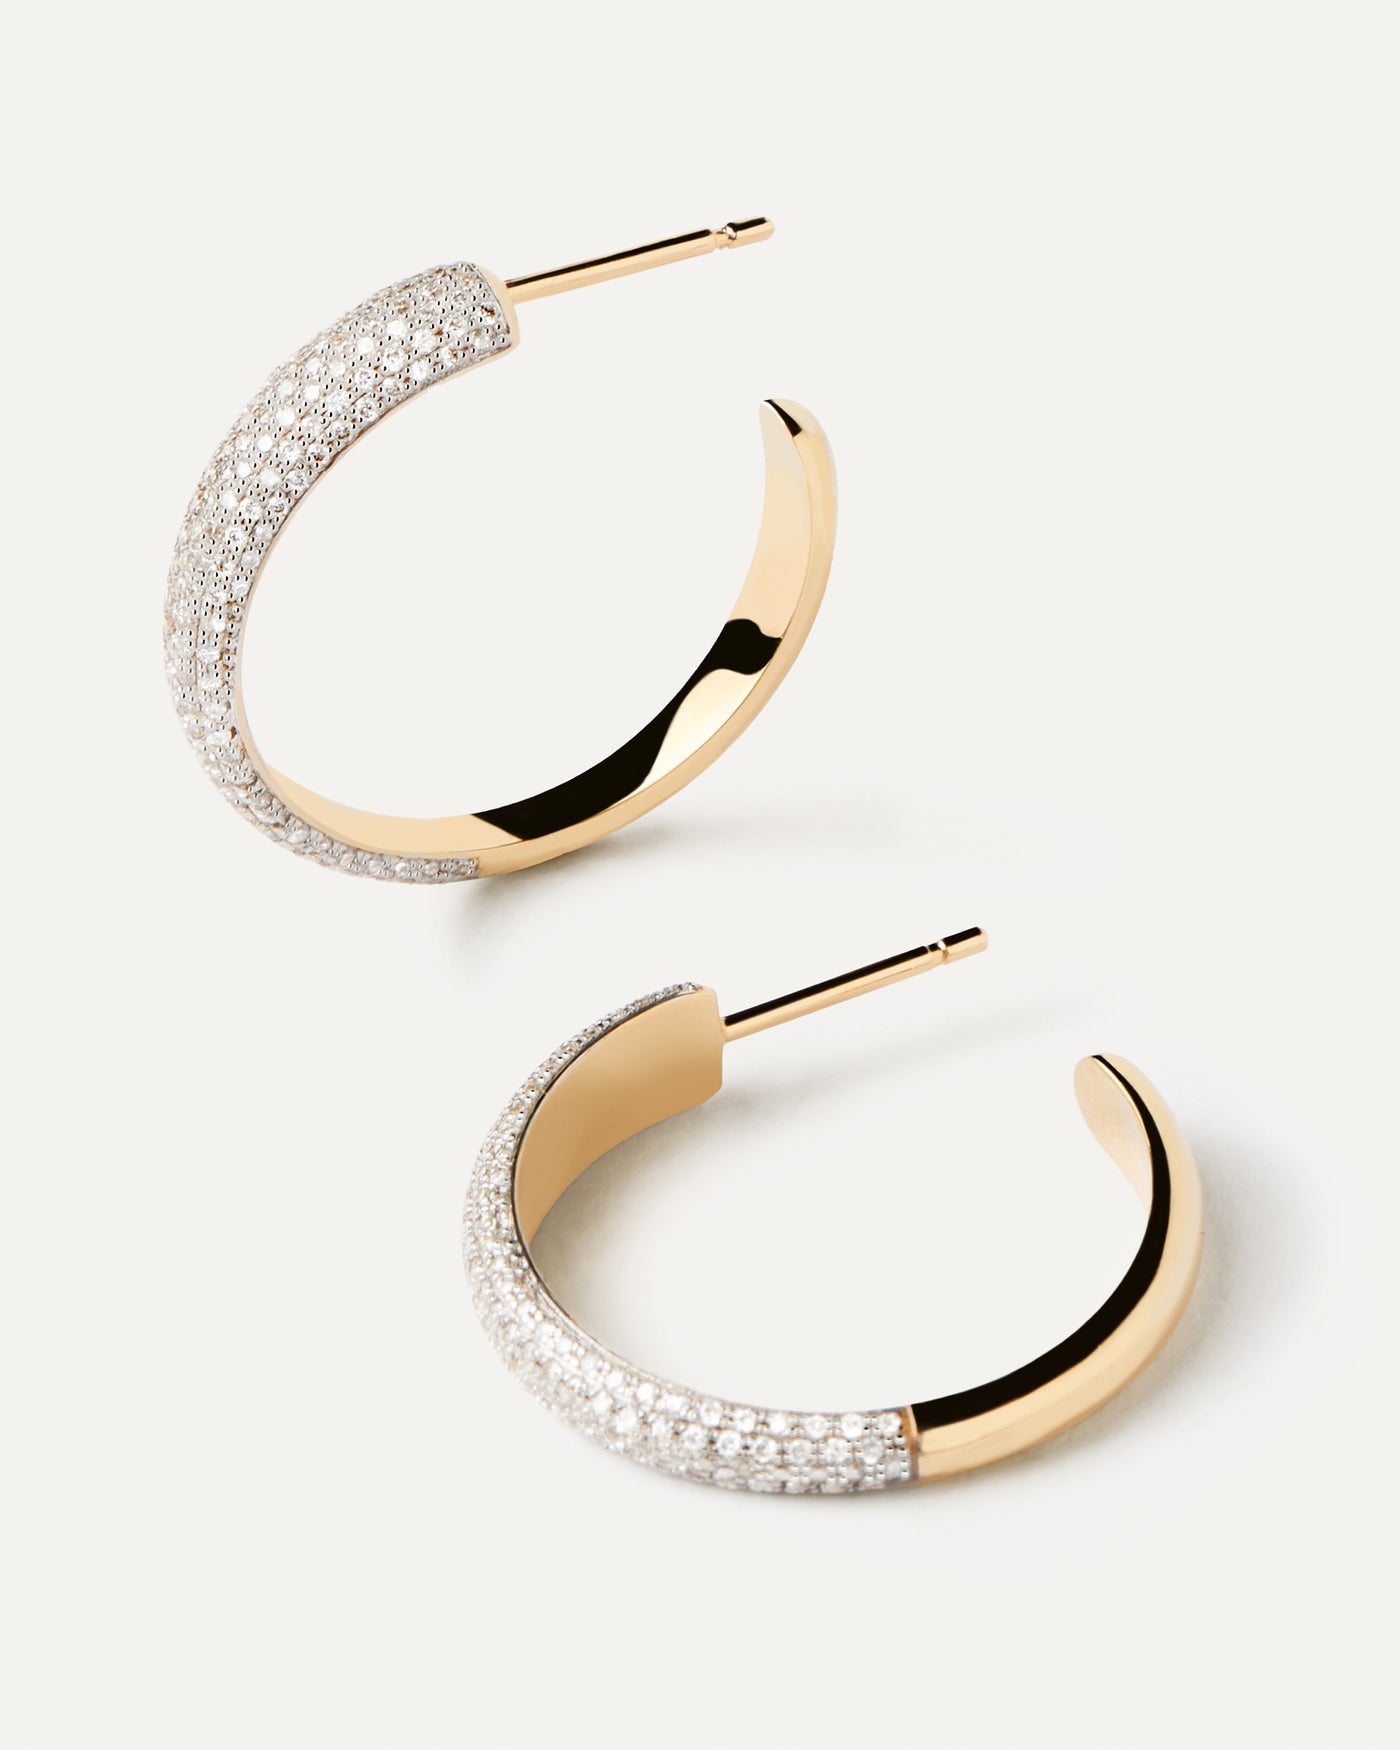 2023 Selection | Diamonds and Gold Soho Hoops. Open hoop earrings in solid yellow gold with contrasting 170 pavé diamonds of 0.51 carats. Get the latest arrival from PDPAOLA. Place your order safely and get this Best Seller. Free Shipping.